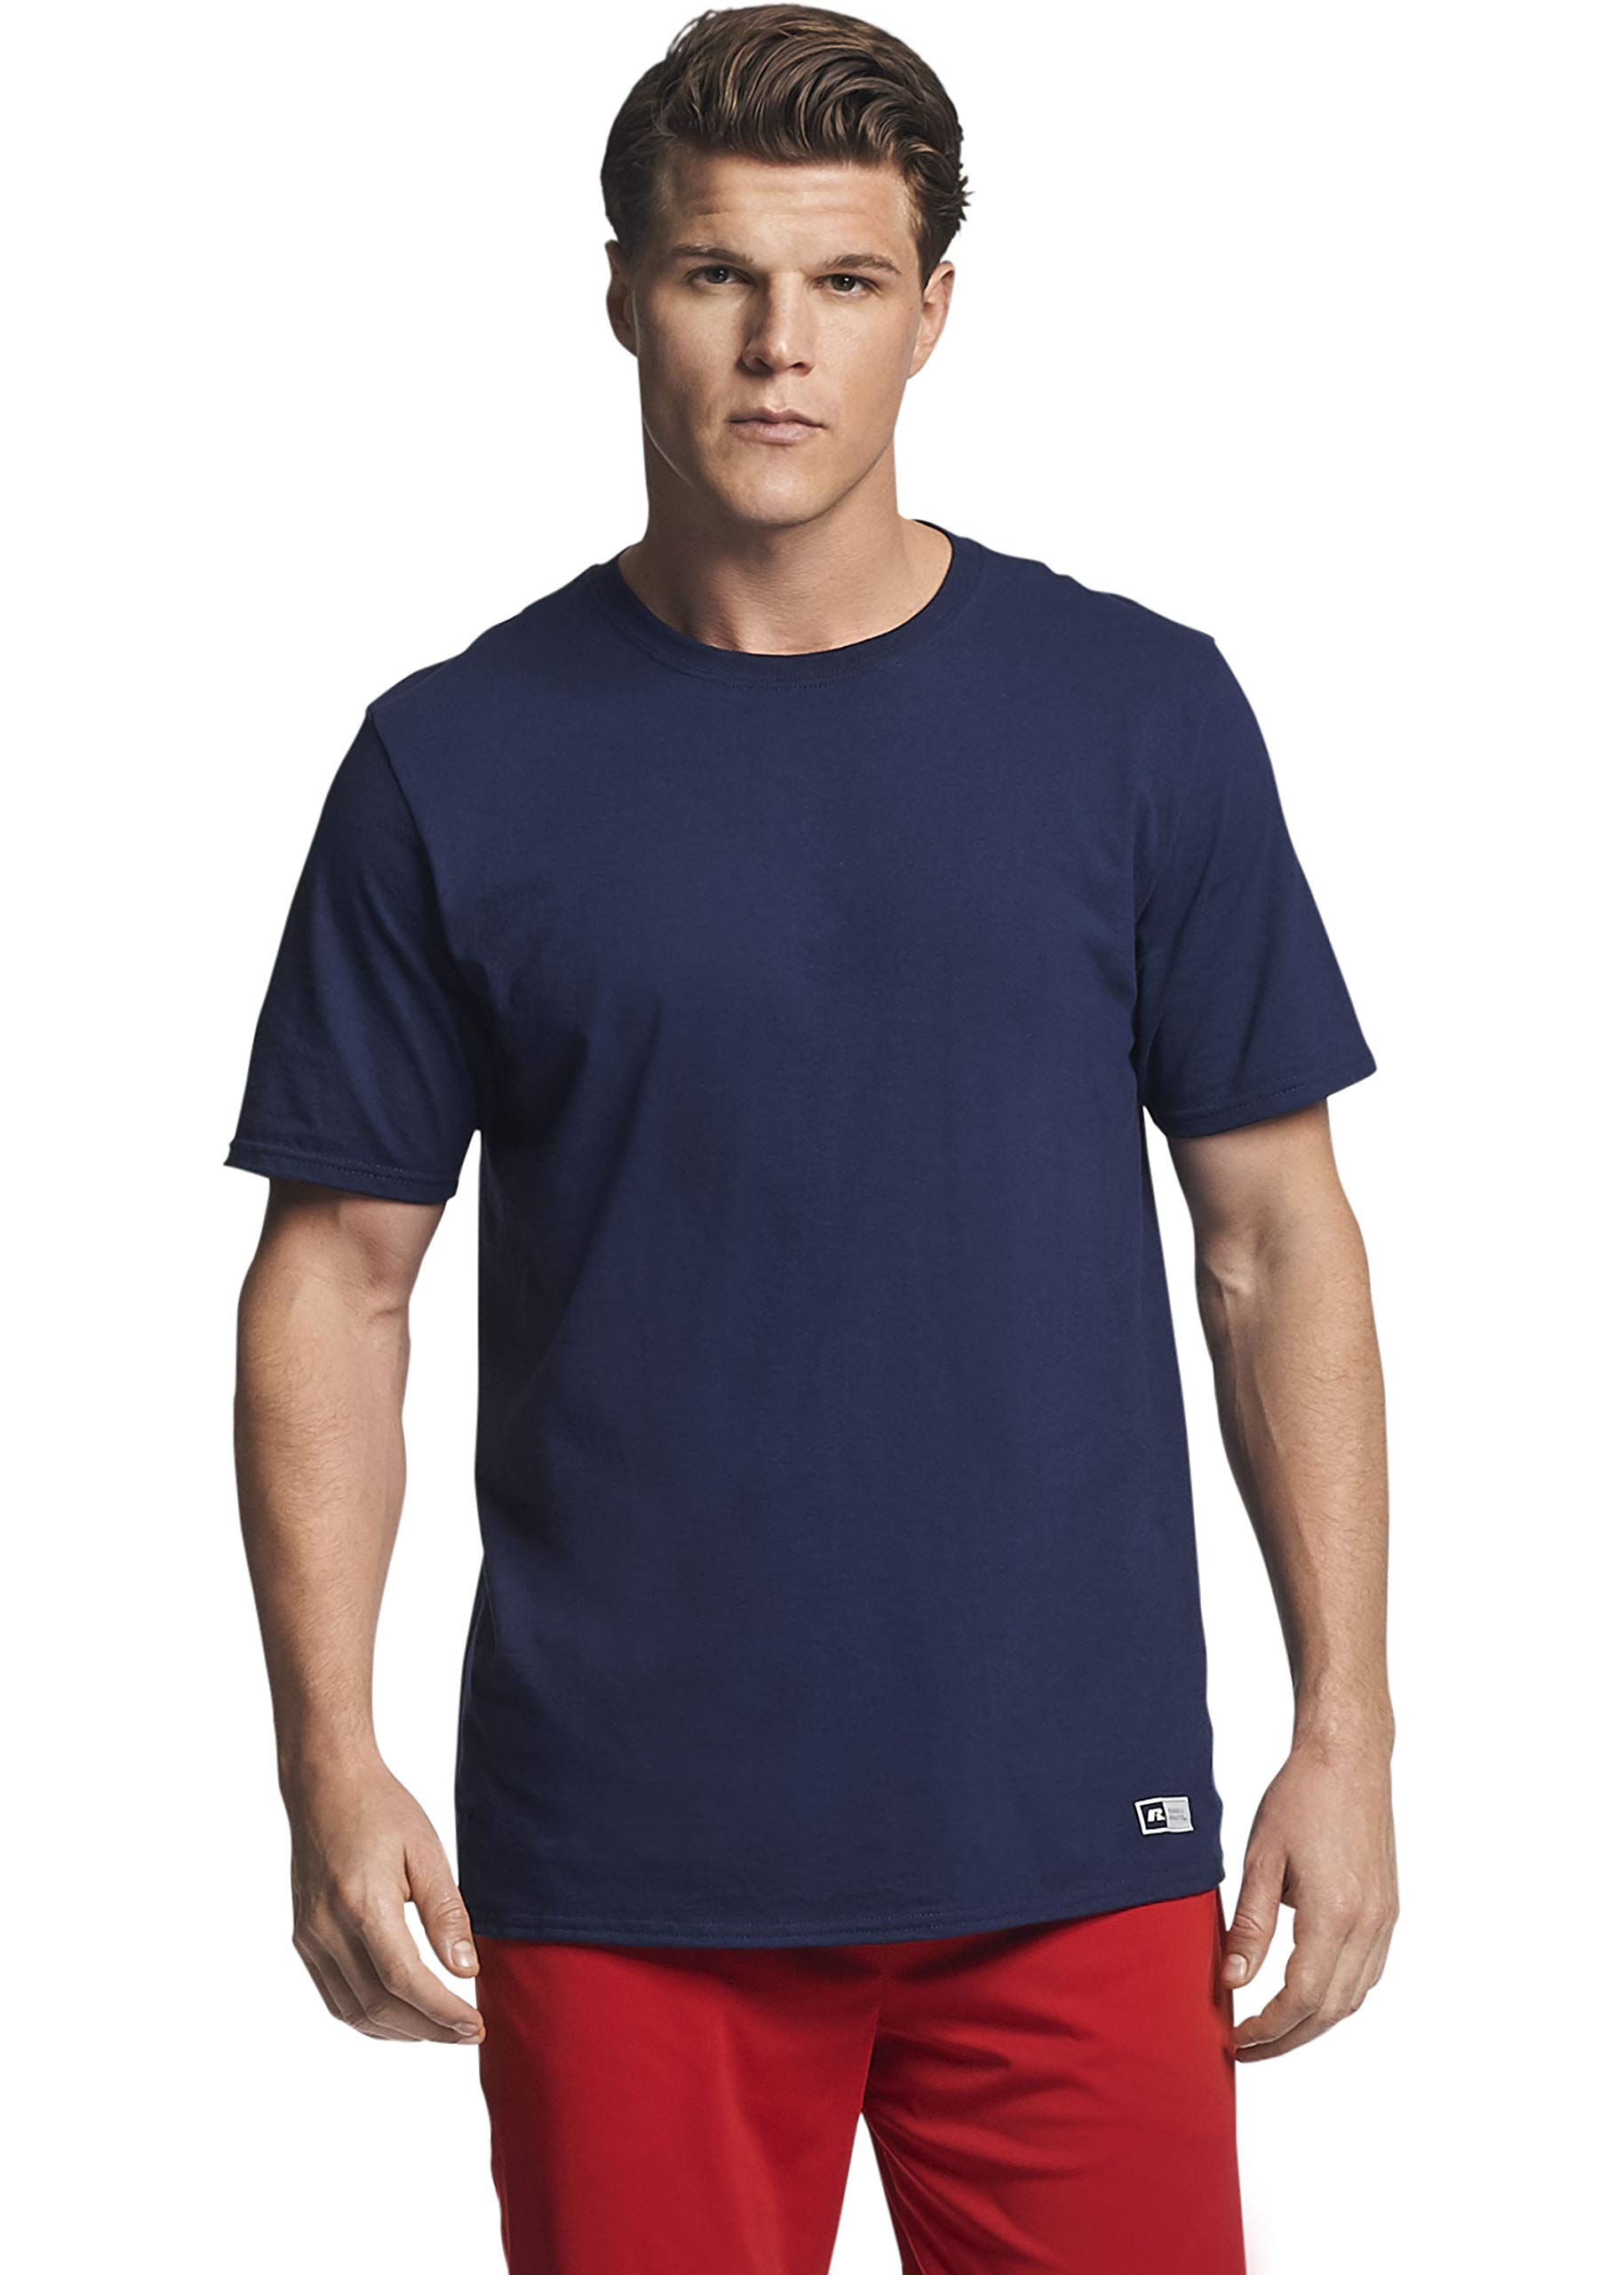 Russell Athletic Men's Cotton Performance Short Sleeve T-Shirt